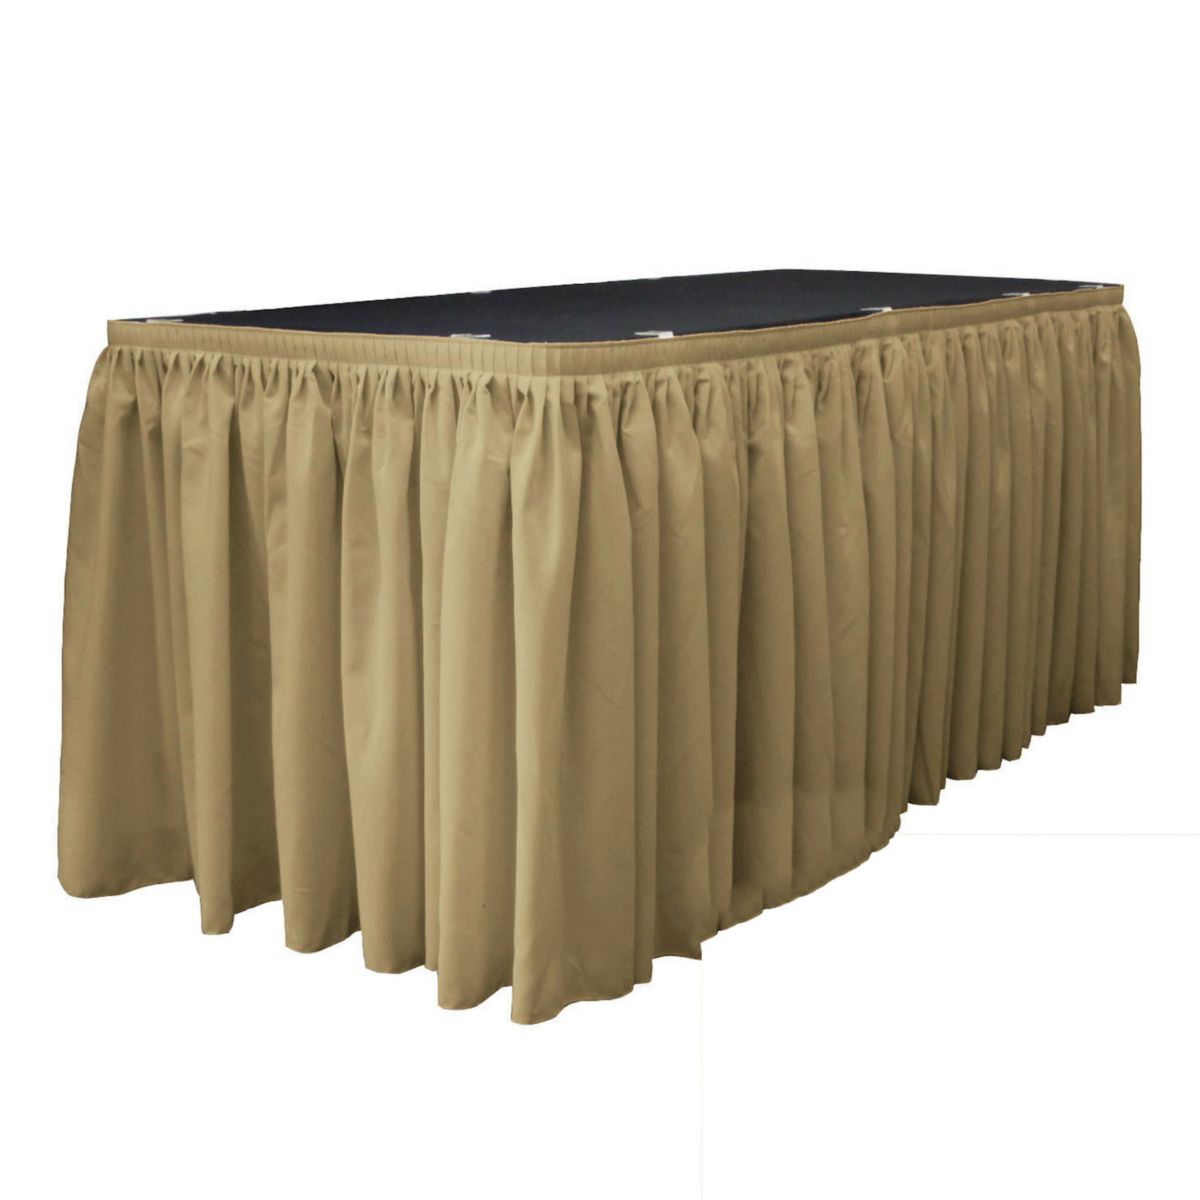 Polyester Poplin Table Skirt 17-foot By 29-inch Long With 10 L-clips Slickblue